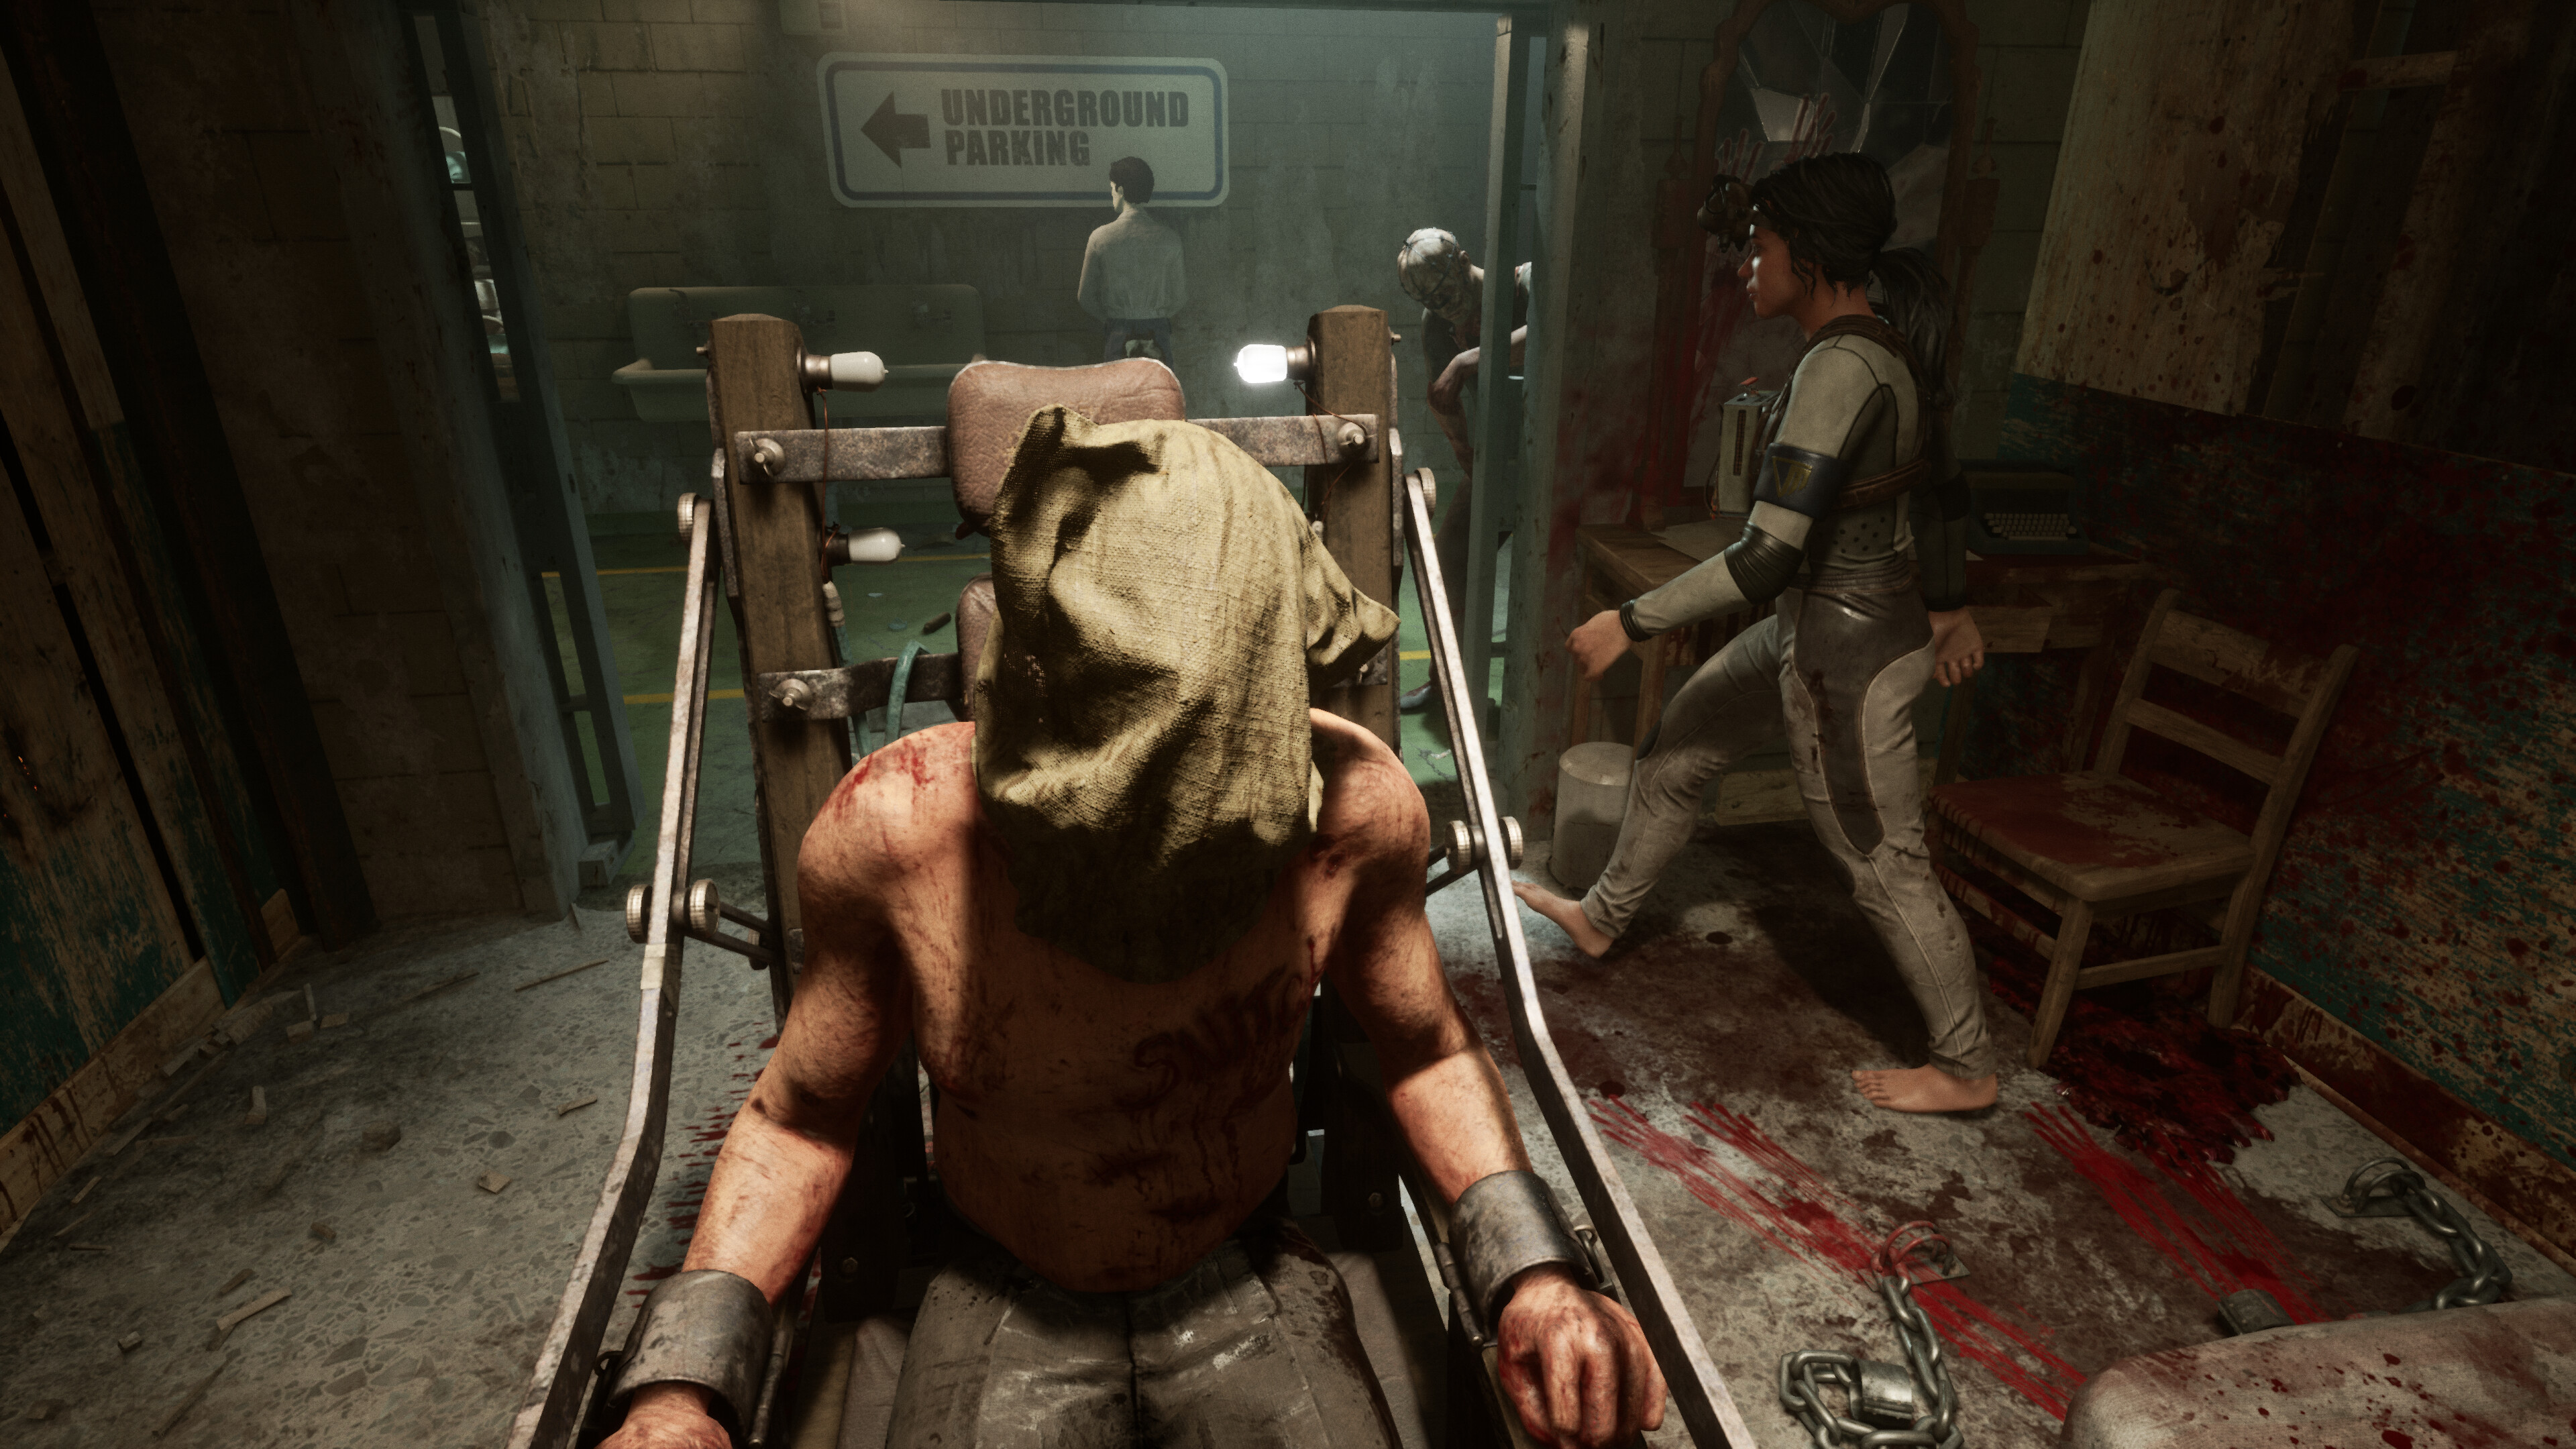 THE OUTLAST TRIALS DROPS BRUTAL GAMEPLAY TRAILER - THE HORROR ENTERTAINMENT  MAGAZINE